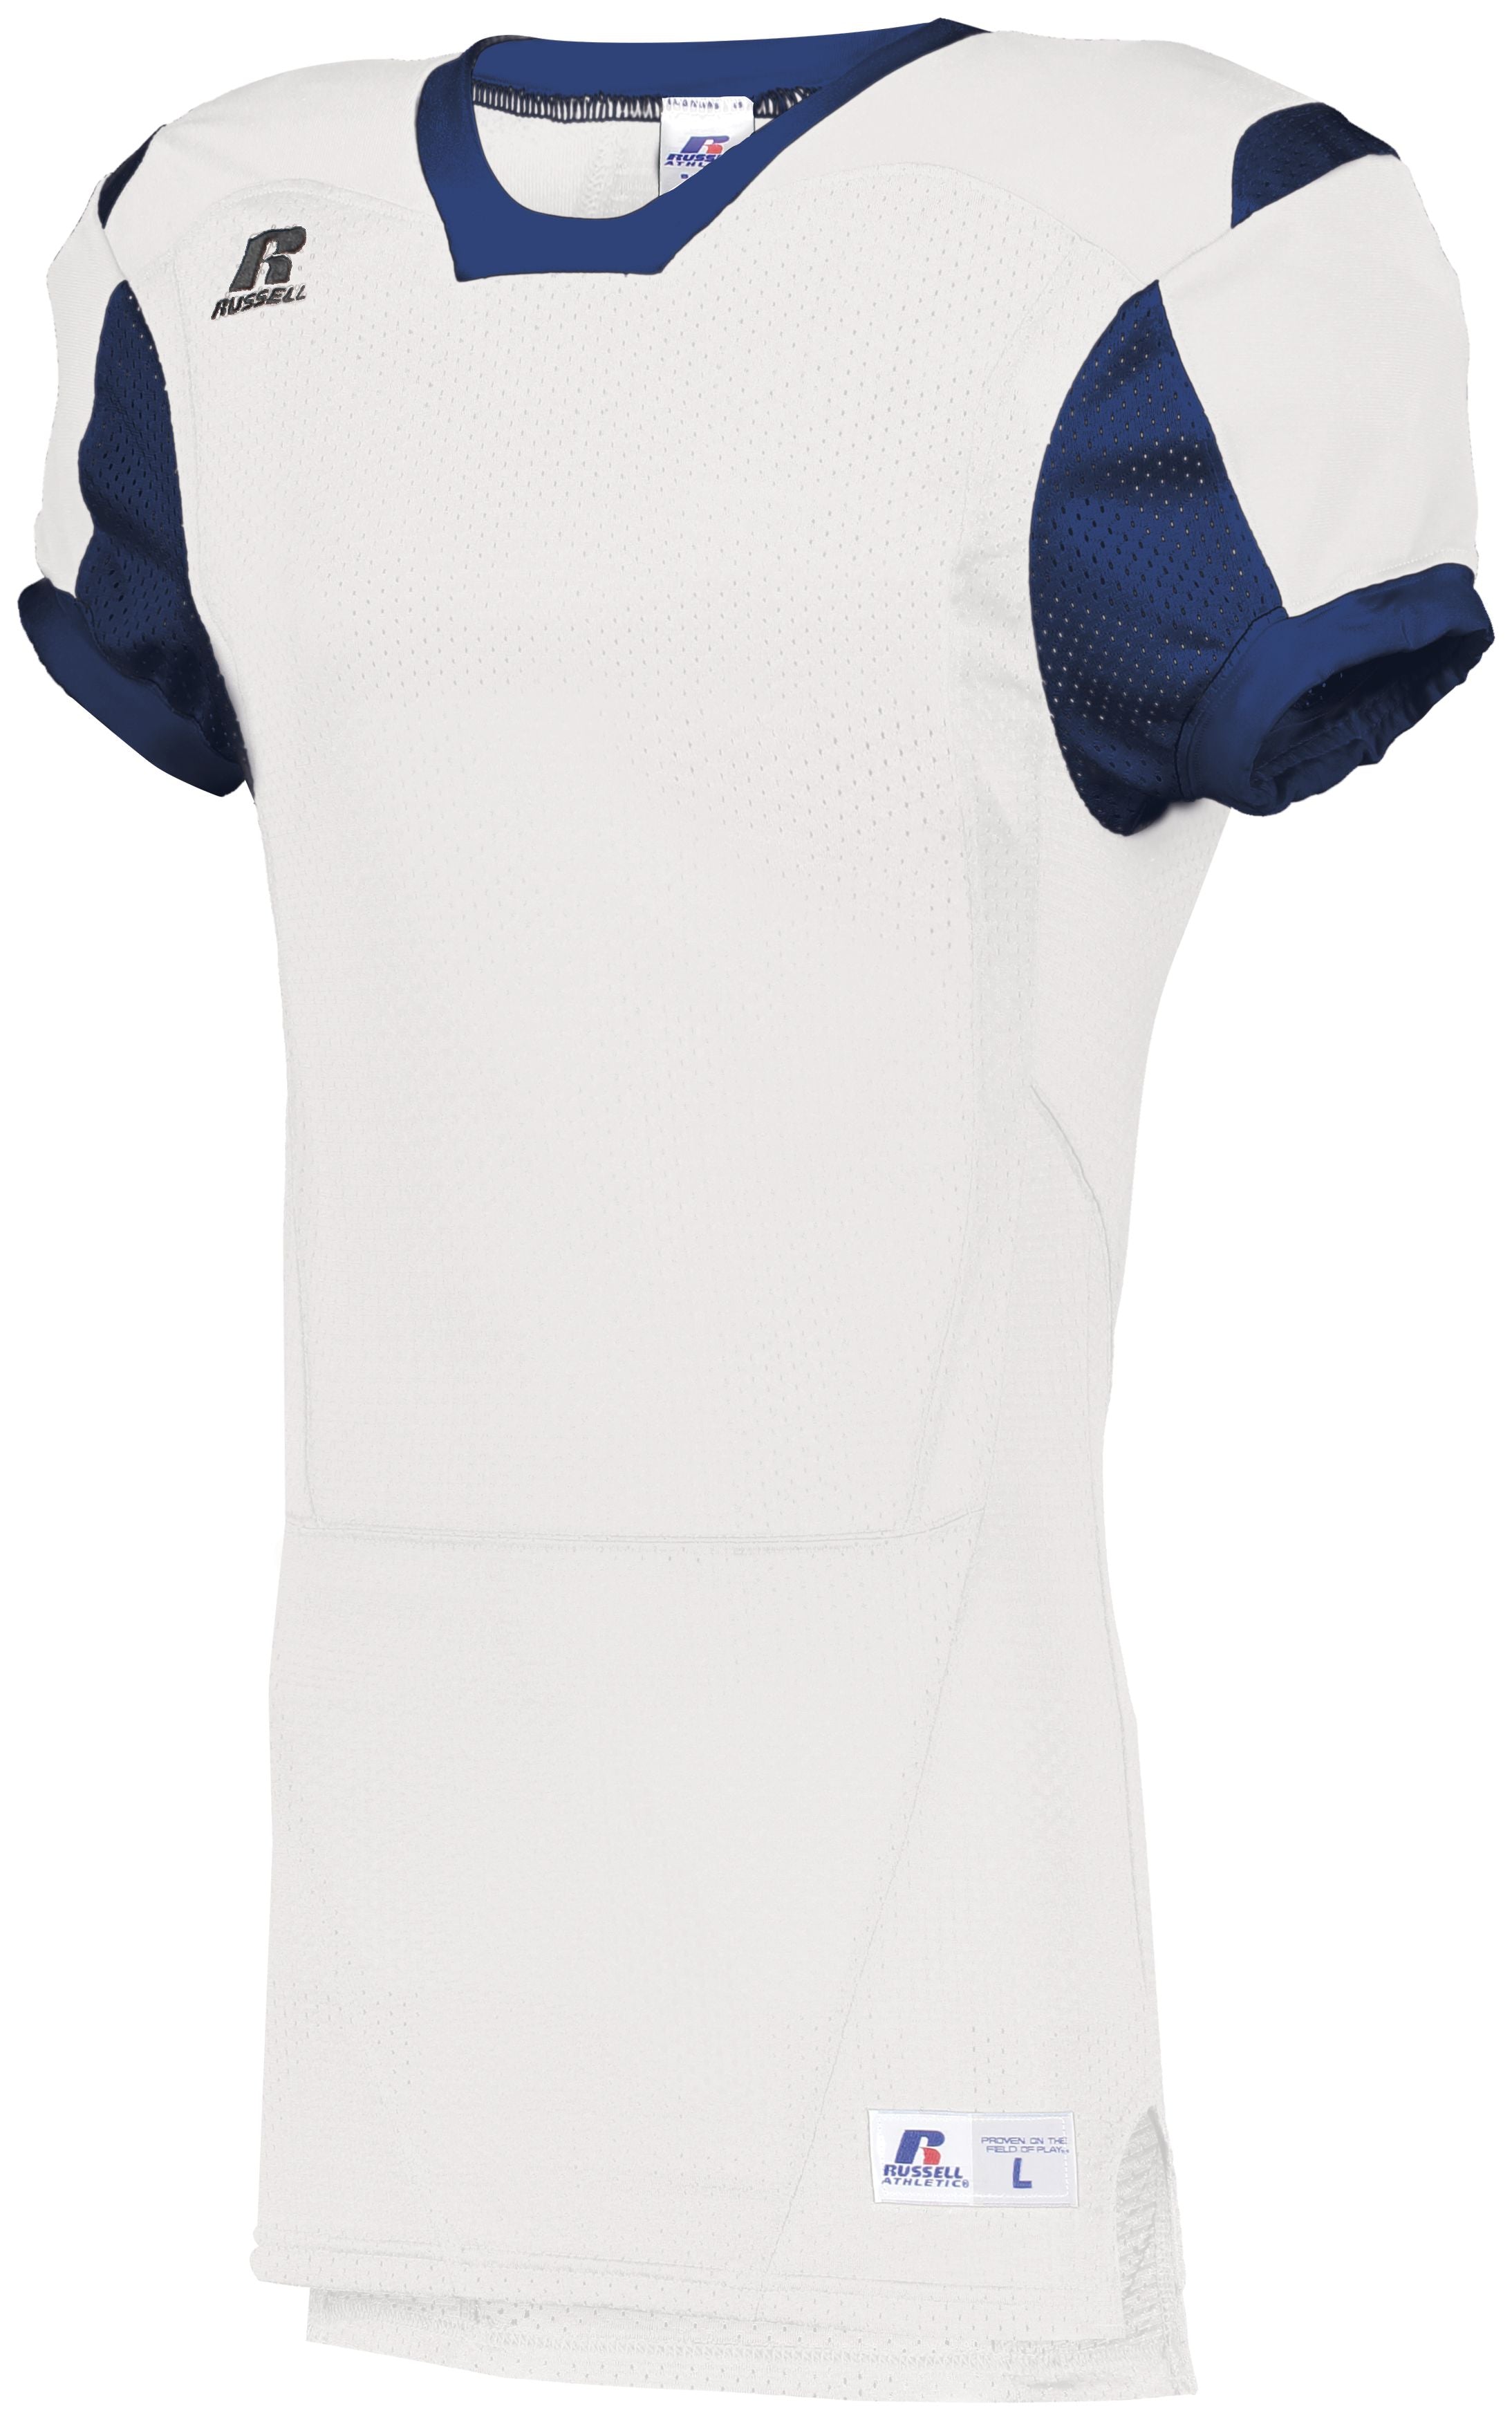 Russell Athletic Color Block Game Jersey in White/Navy  -Part of the Adult, Adult-Jersey, Football, Russell-Athletic-Products, Shirts, All-Sports, All-Sports-1 product lines at KanaleyCreations.com